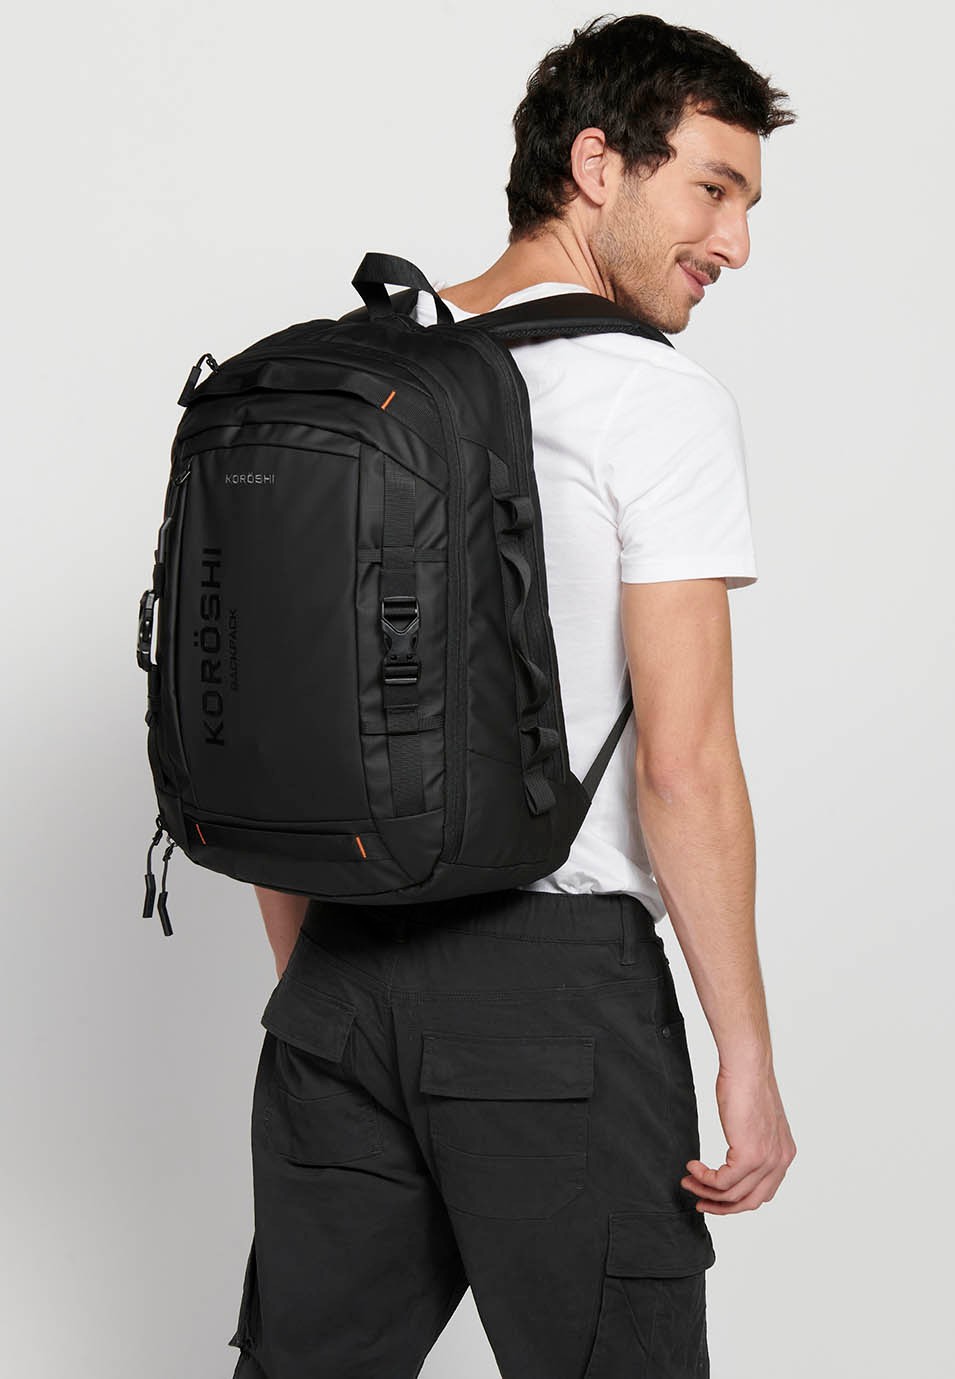 Koröshi backpack with two zippered compartments, one for a laptop and adjustable straps in Black 8